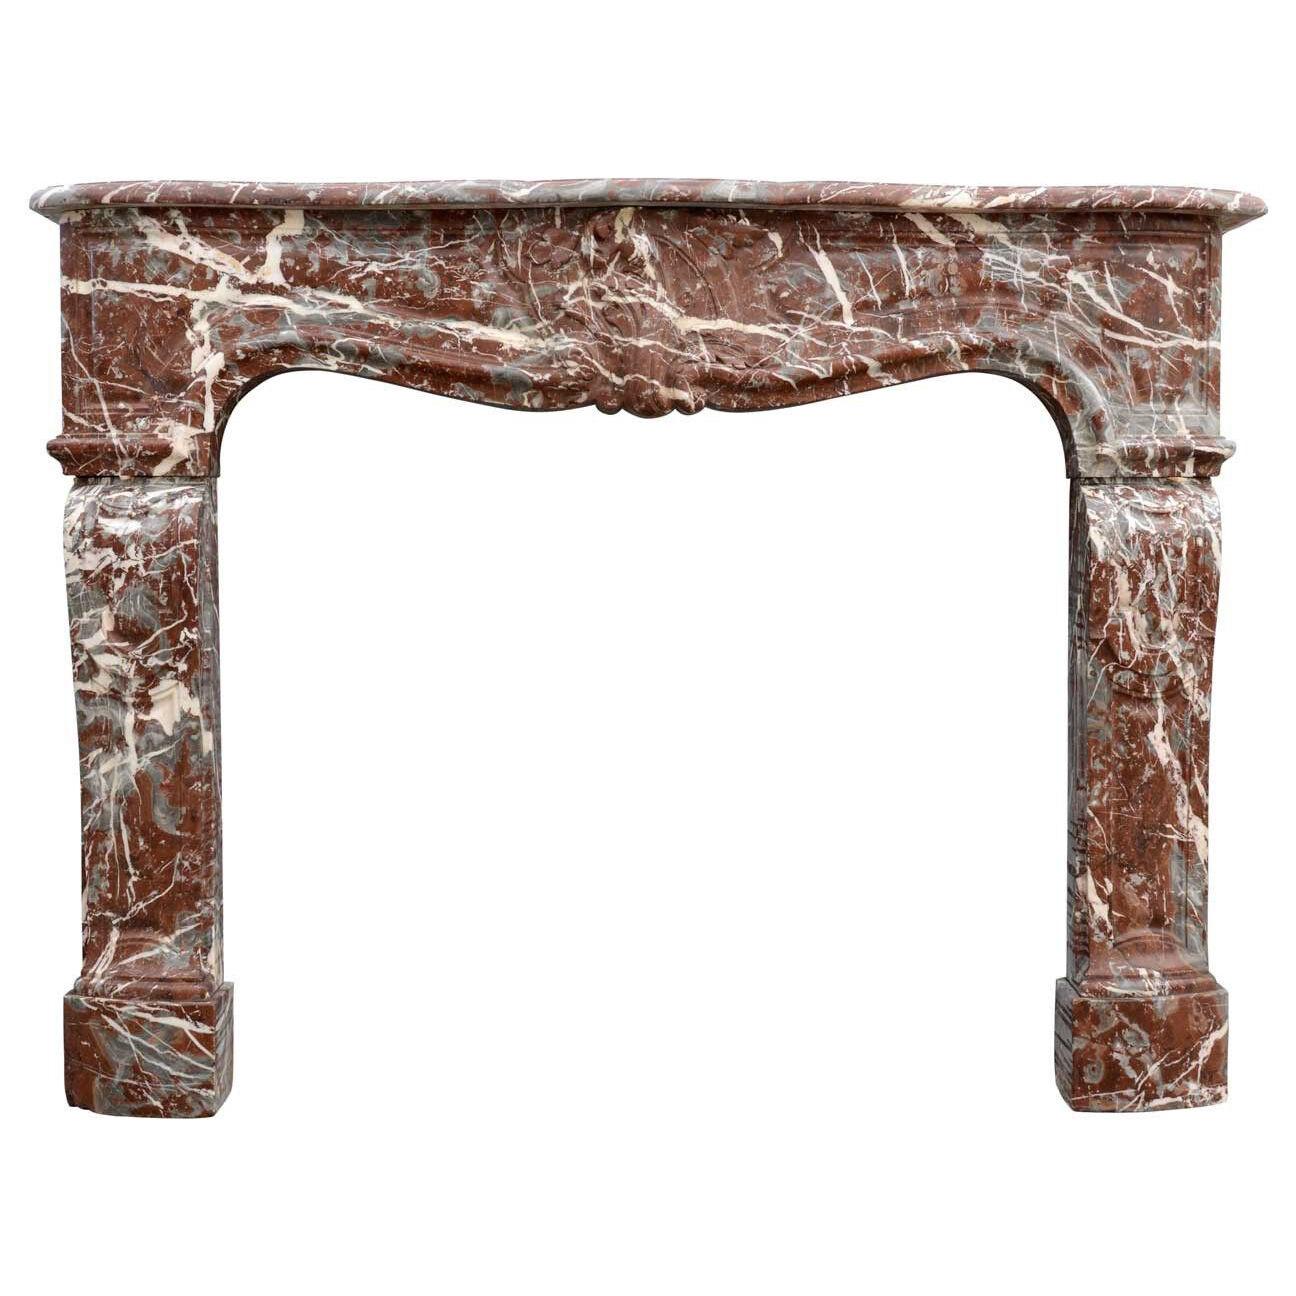 19th century Louis XIV style rance marble fireplace